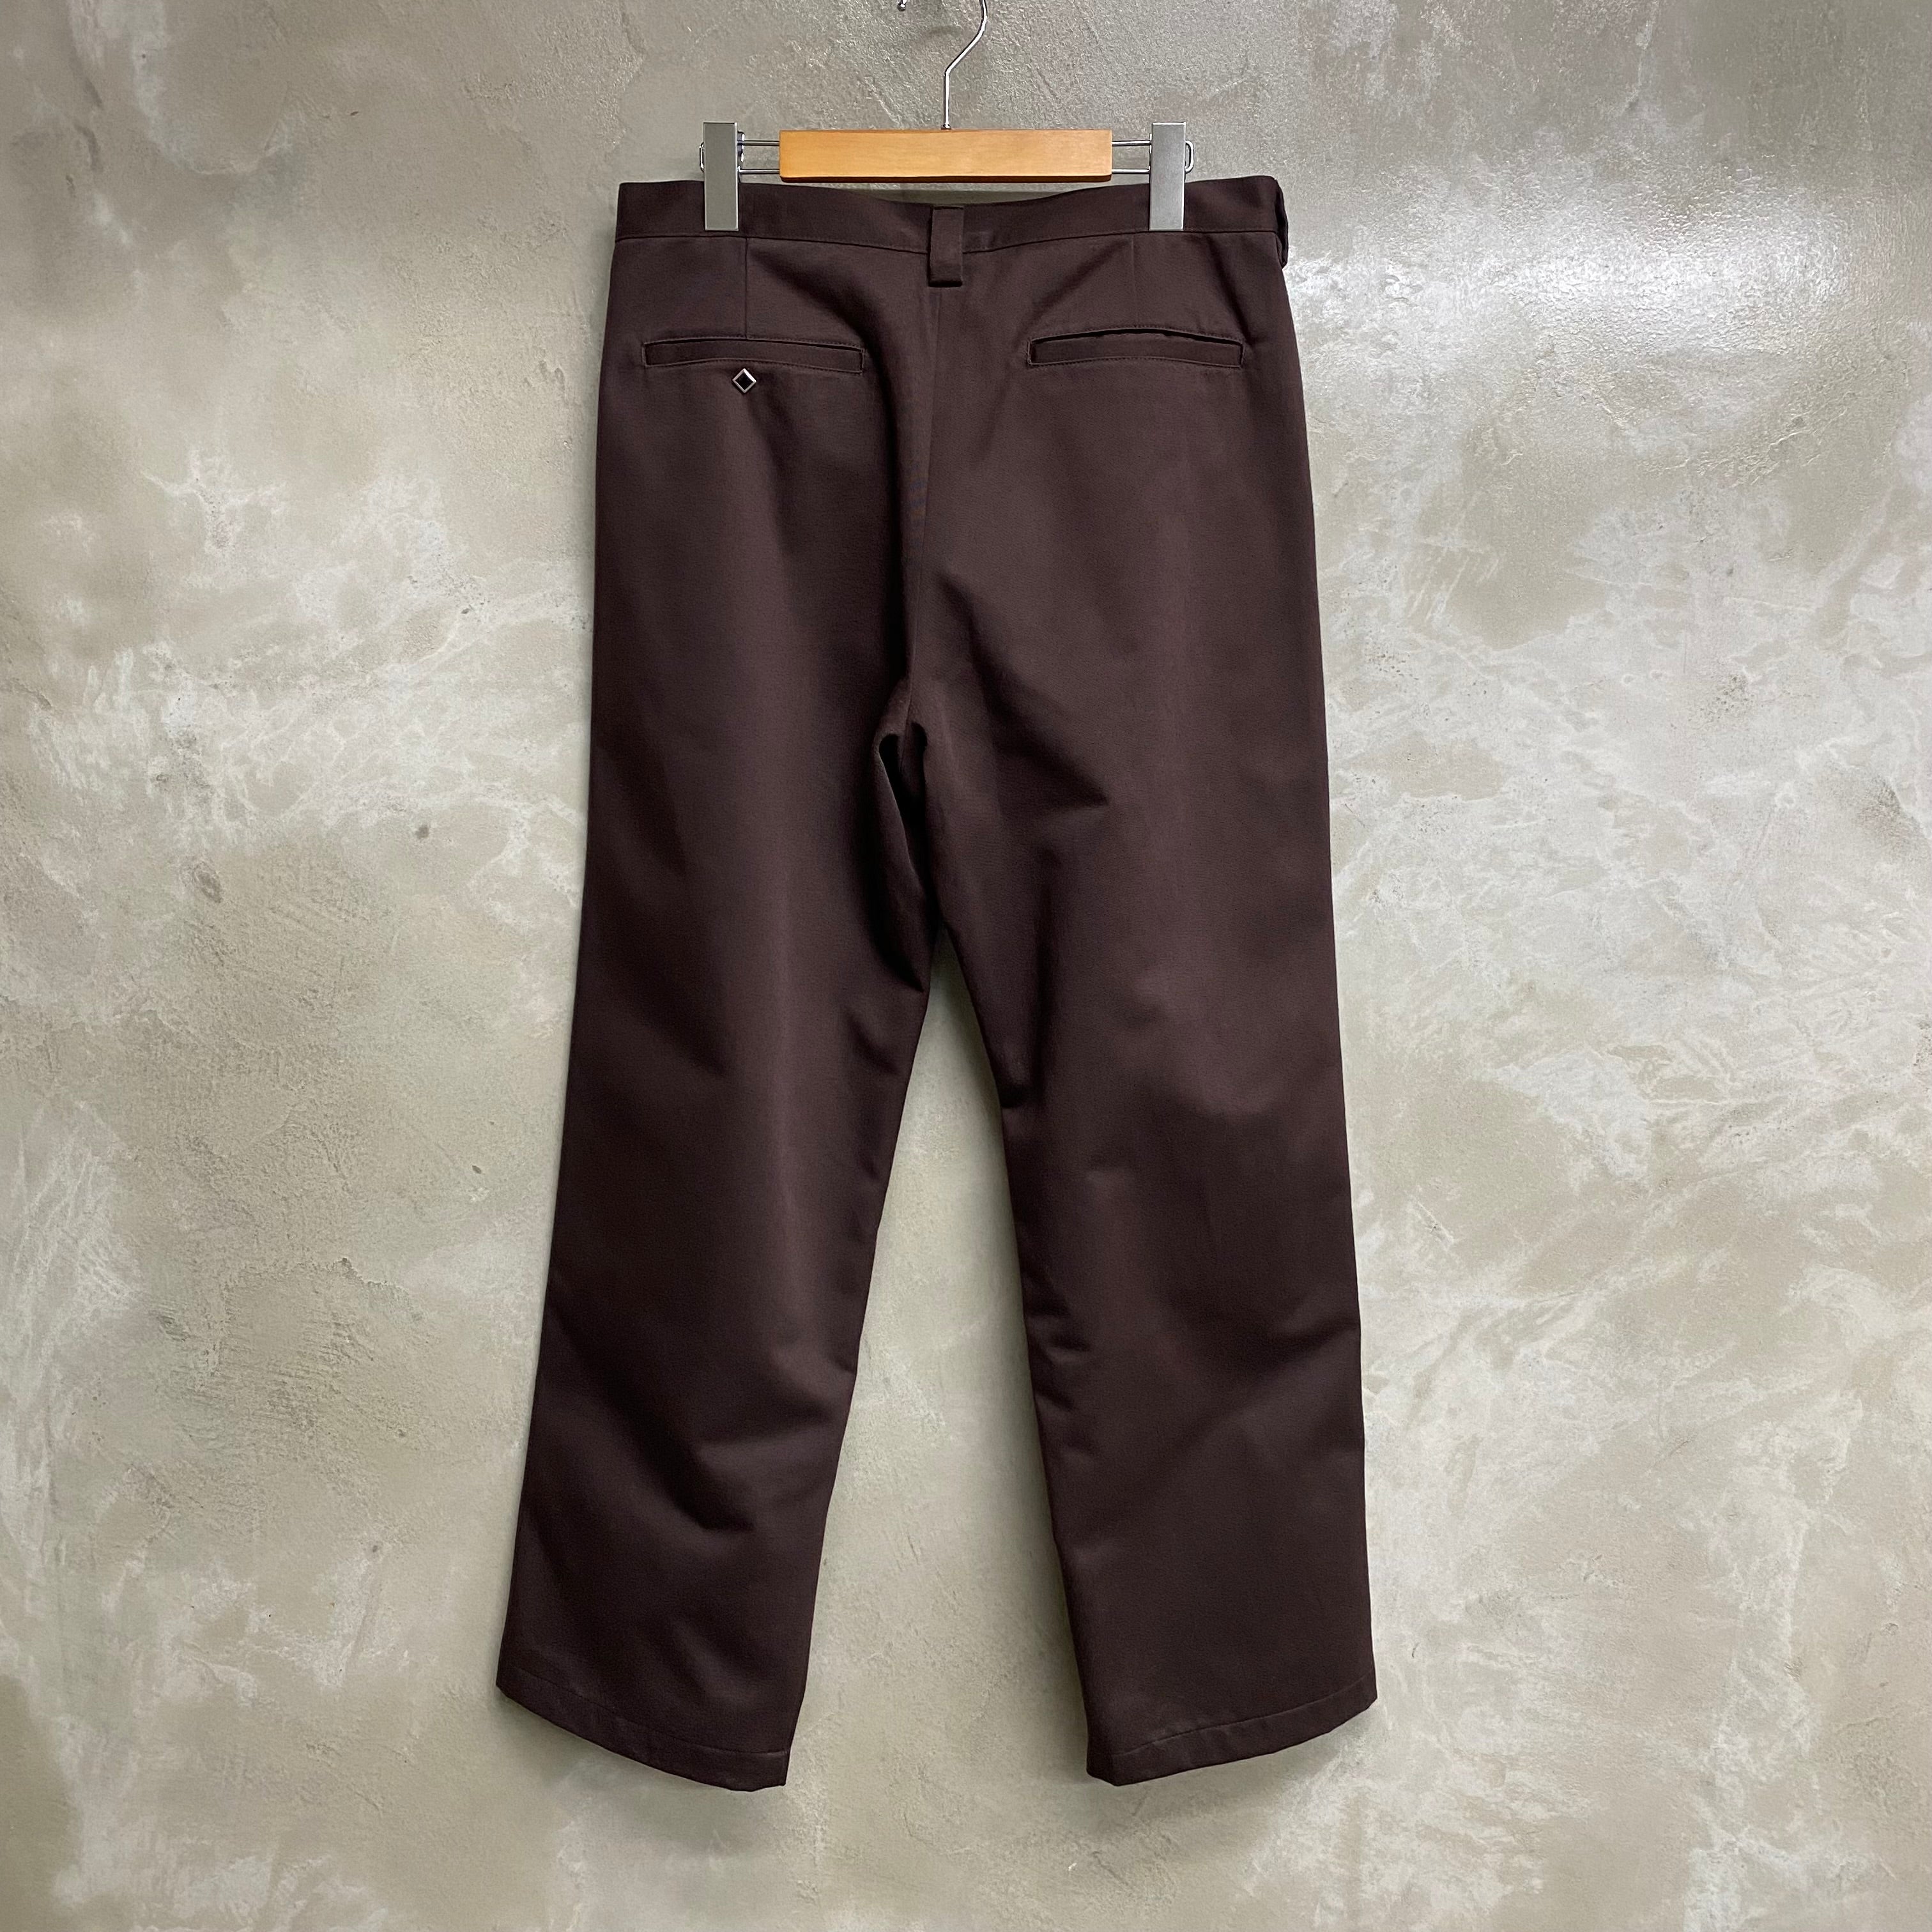 [ ONLY ONE ] LOCALS ONLY  RANCH CHINO PANTS  / LOCALS ONLY